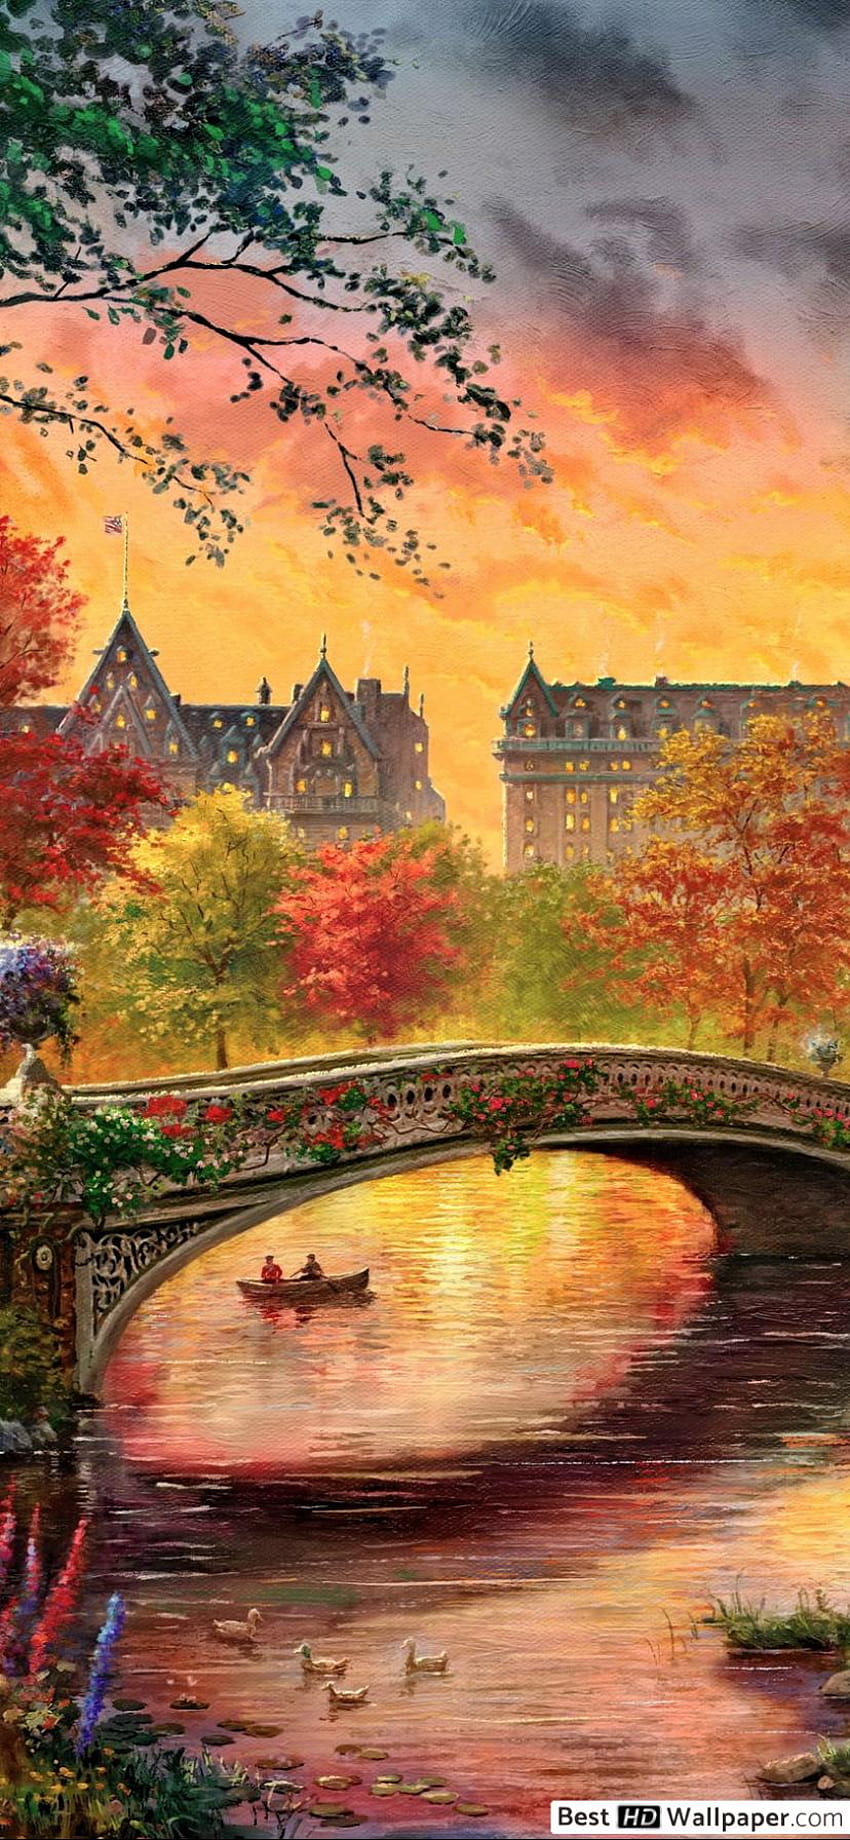 Painting of a bridge over a river with a boat in the water - Vintage fall